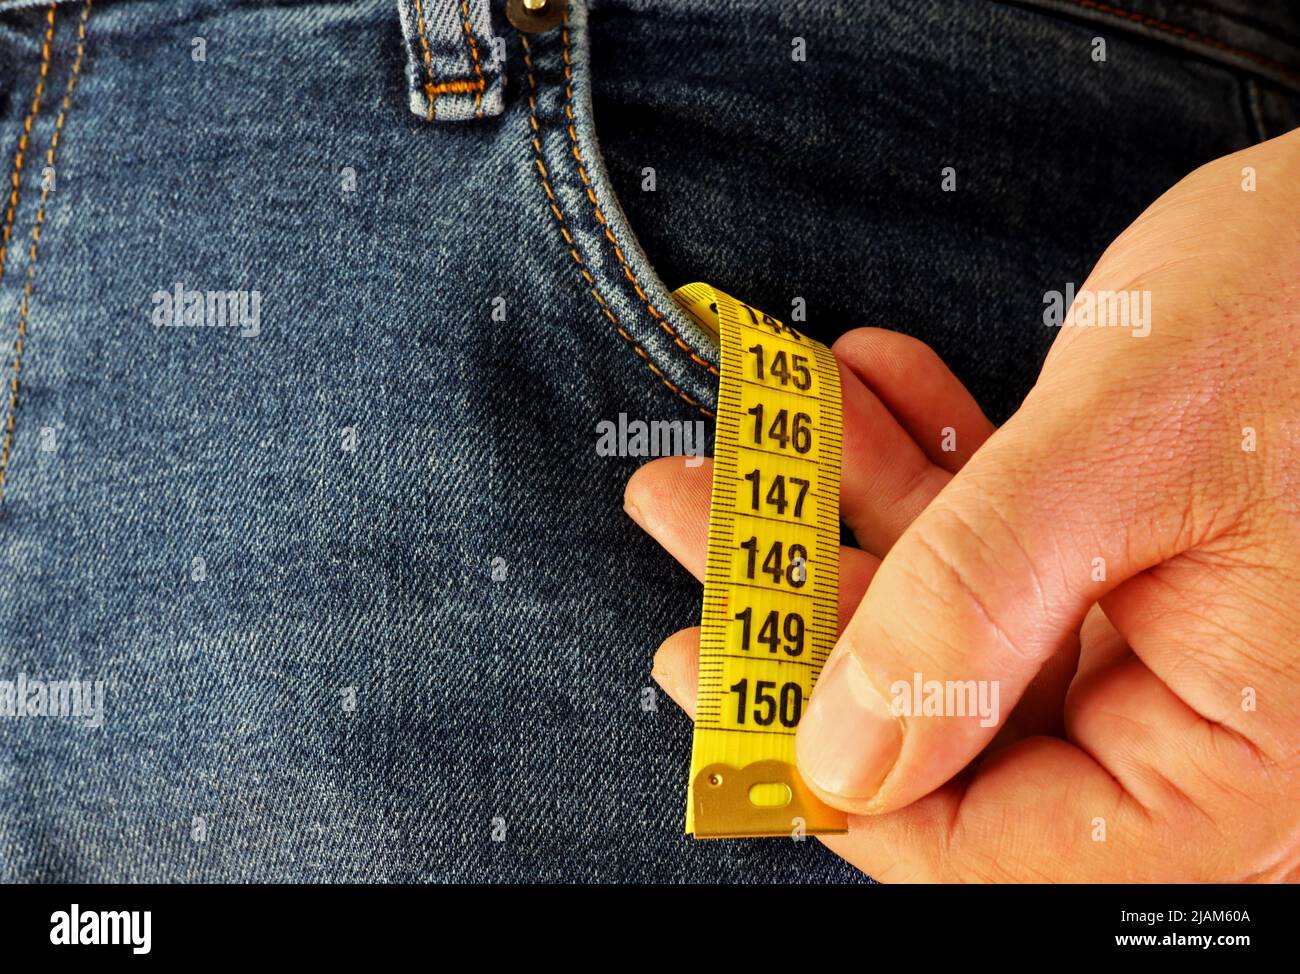 yellow measuring tape in a man's jeans pocket Stock Photo